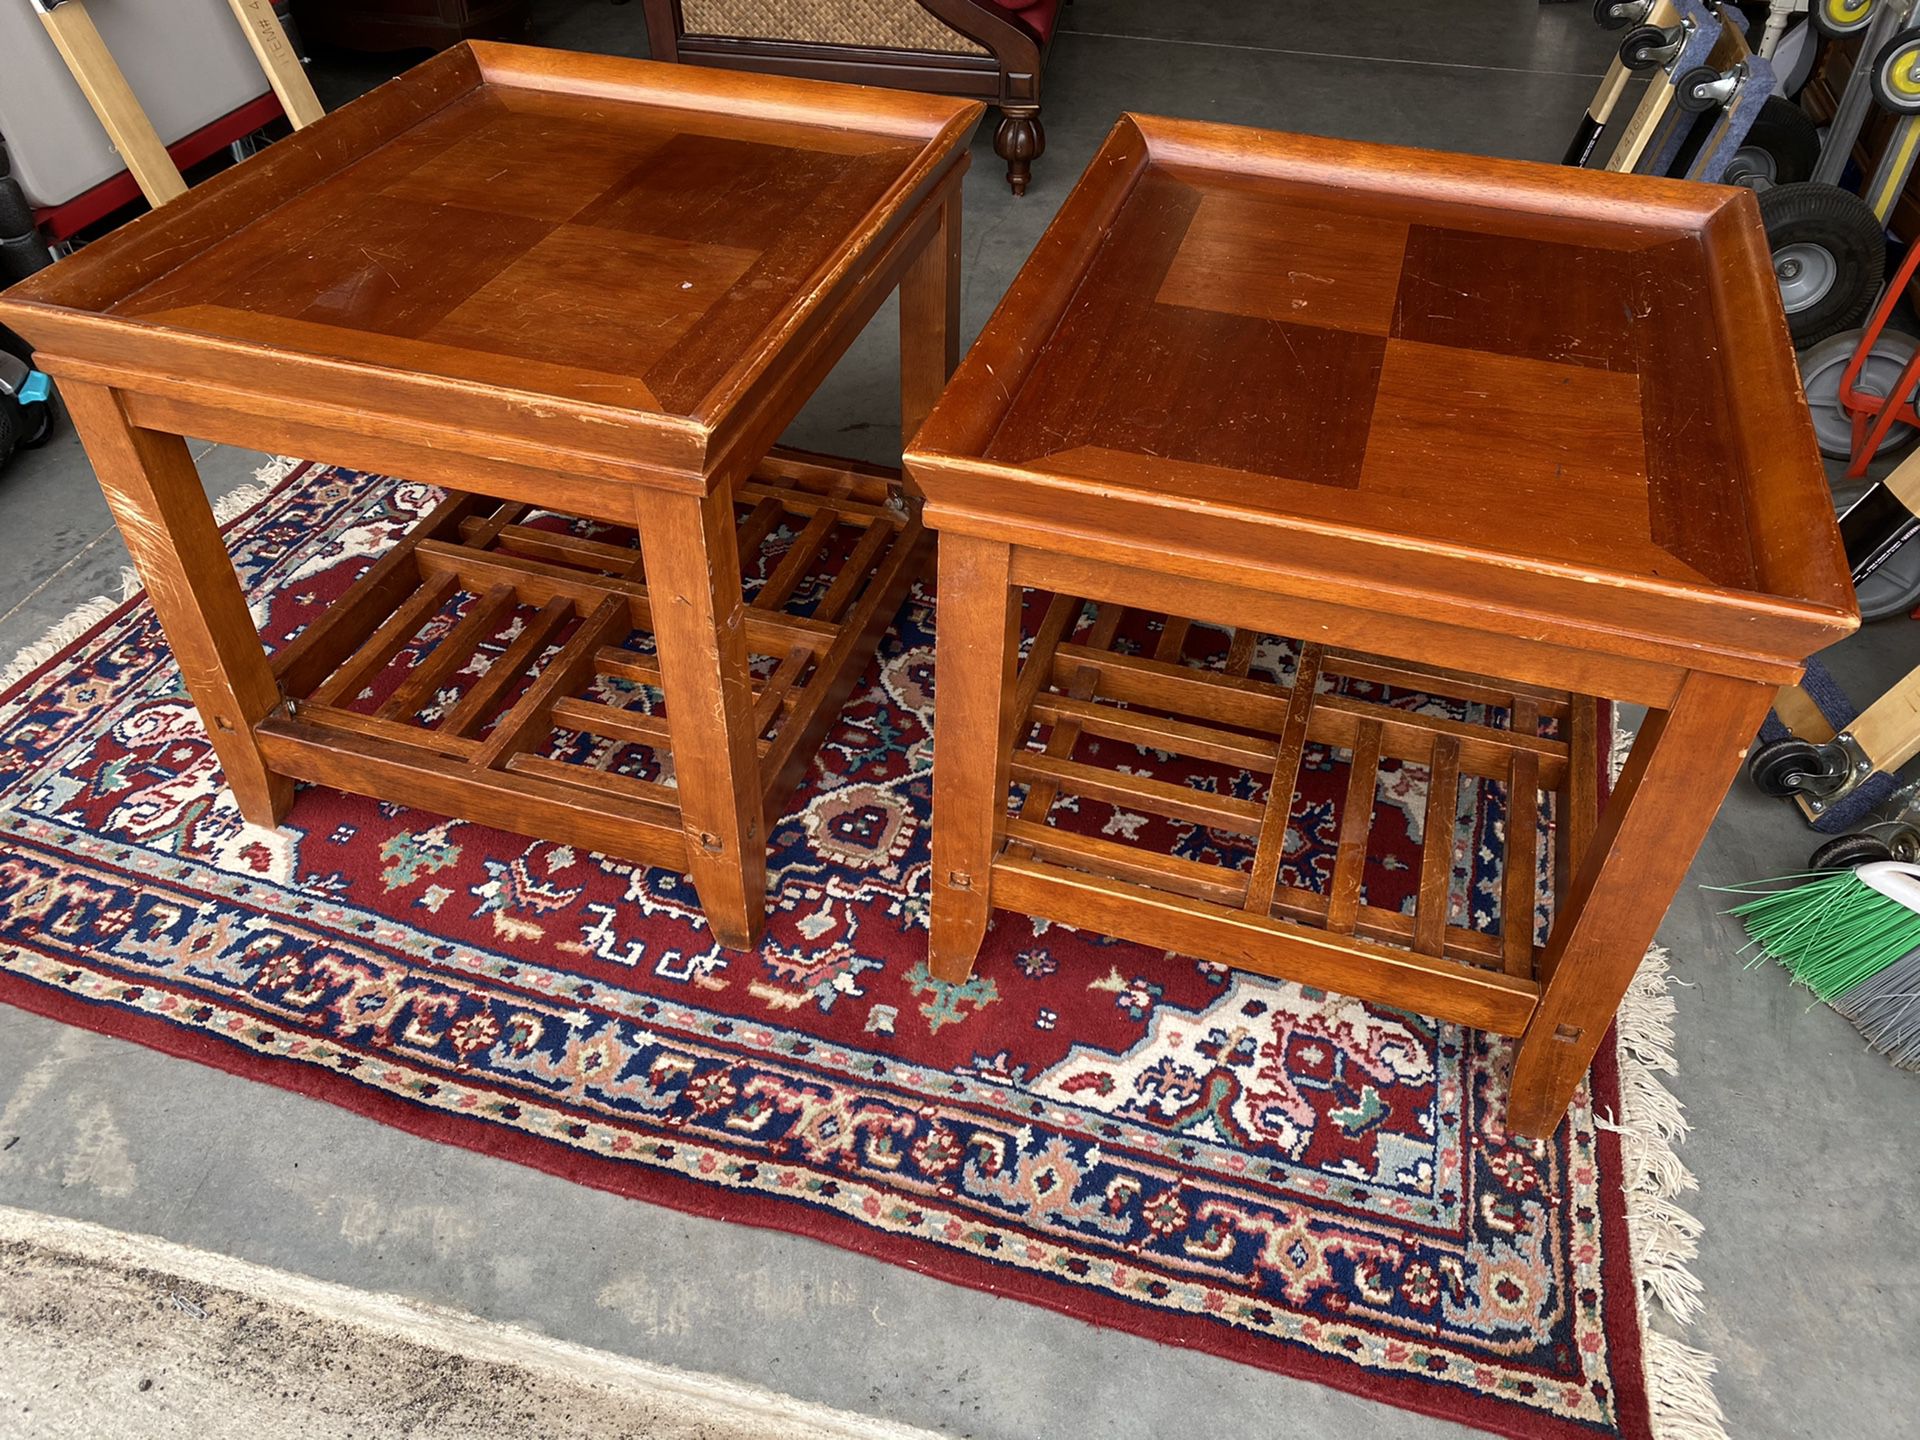 Pair of Side Tables - Price for Both